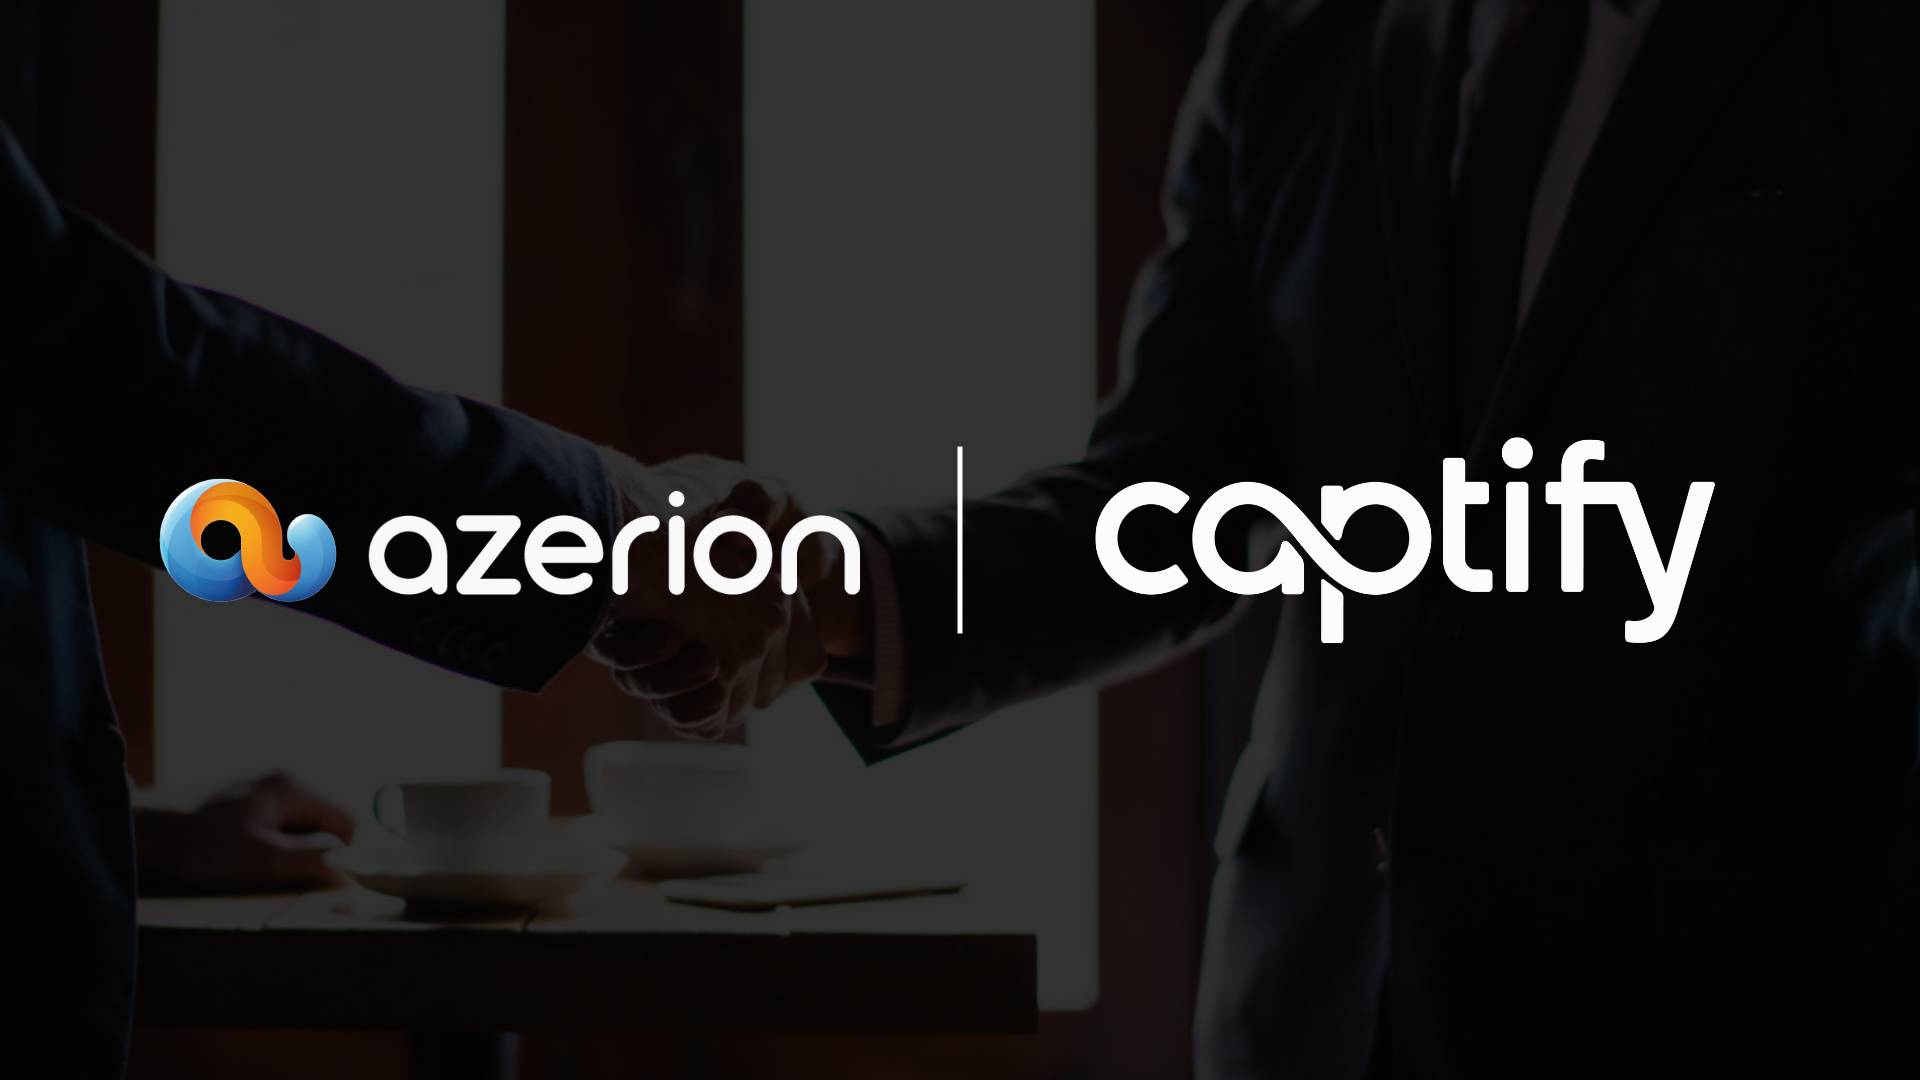 Azerion and Captify Partner to Enhance Cookieless Audience Solutions in France and Italy